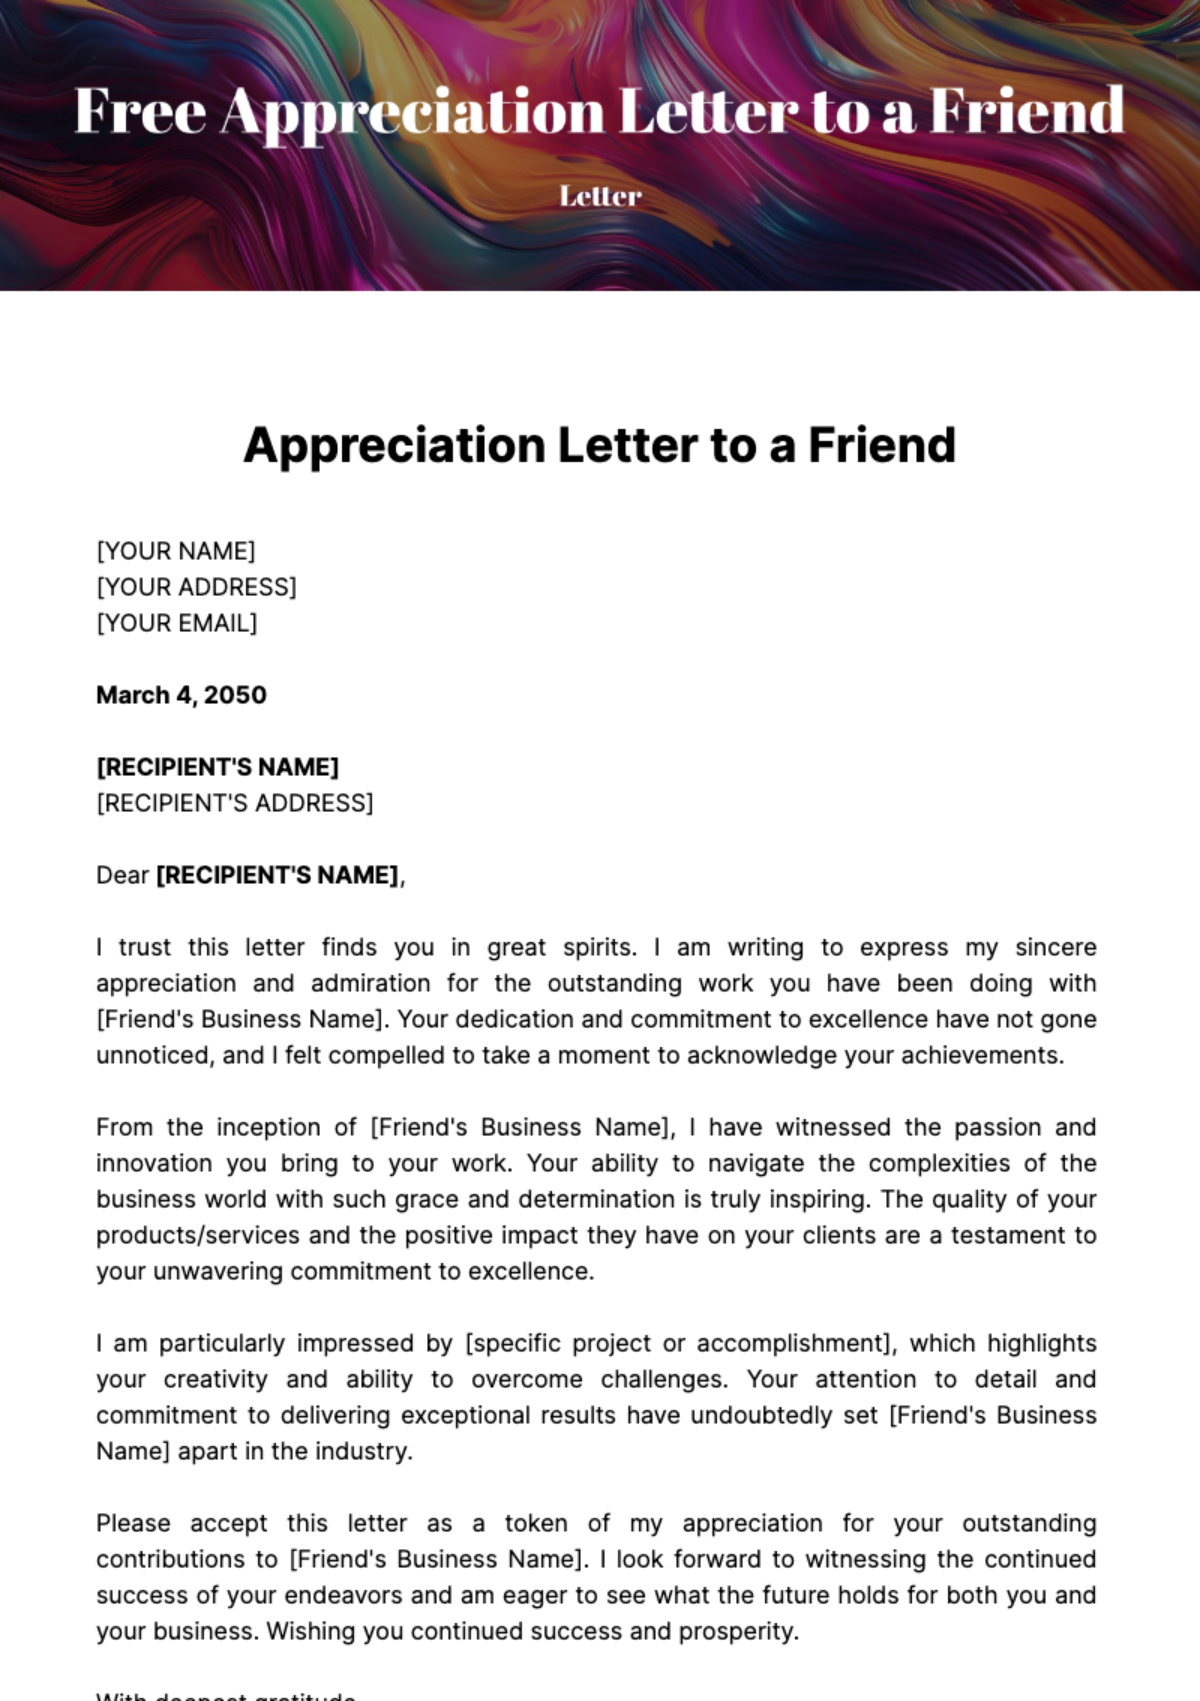 Free Appreciation Letter to a Friend Template